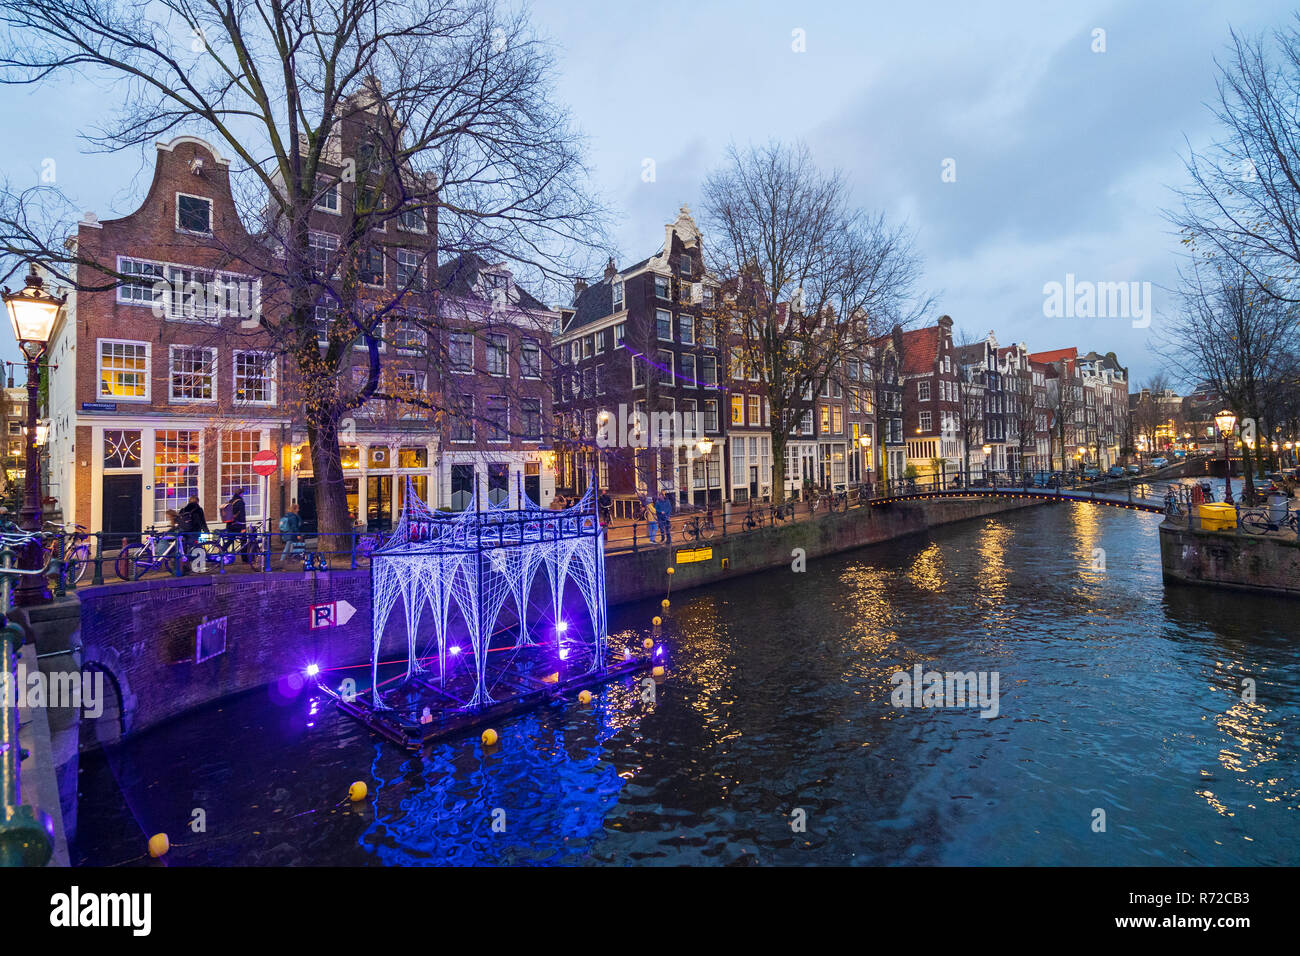 Evening view of Brouwersgracht canal and art installation in Amsterdam, Netherlands Stock Photo